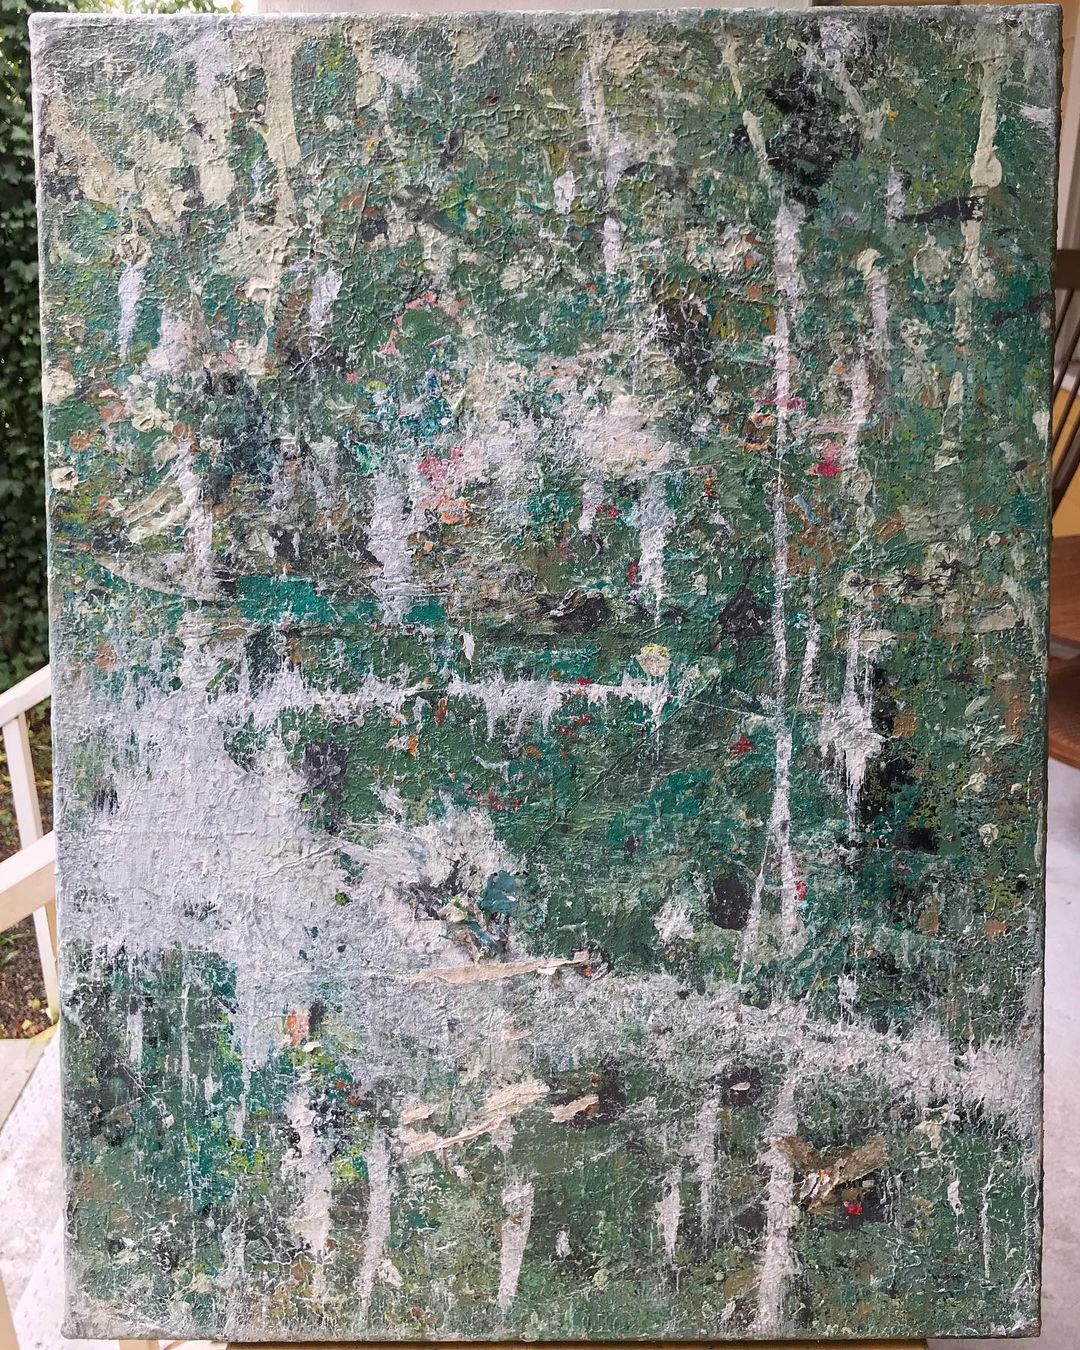 A painting of light green, red, black, white paint splatters created through chance and kinetics. Adhered with mod podge, newspaper, and magazine pages.